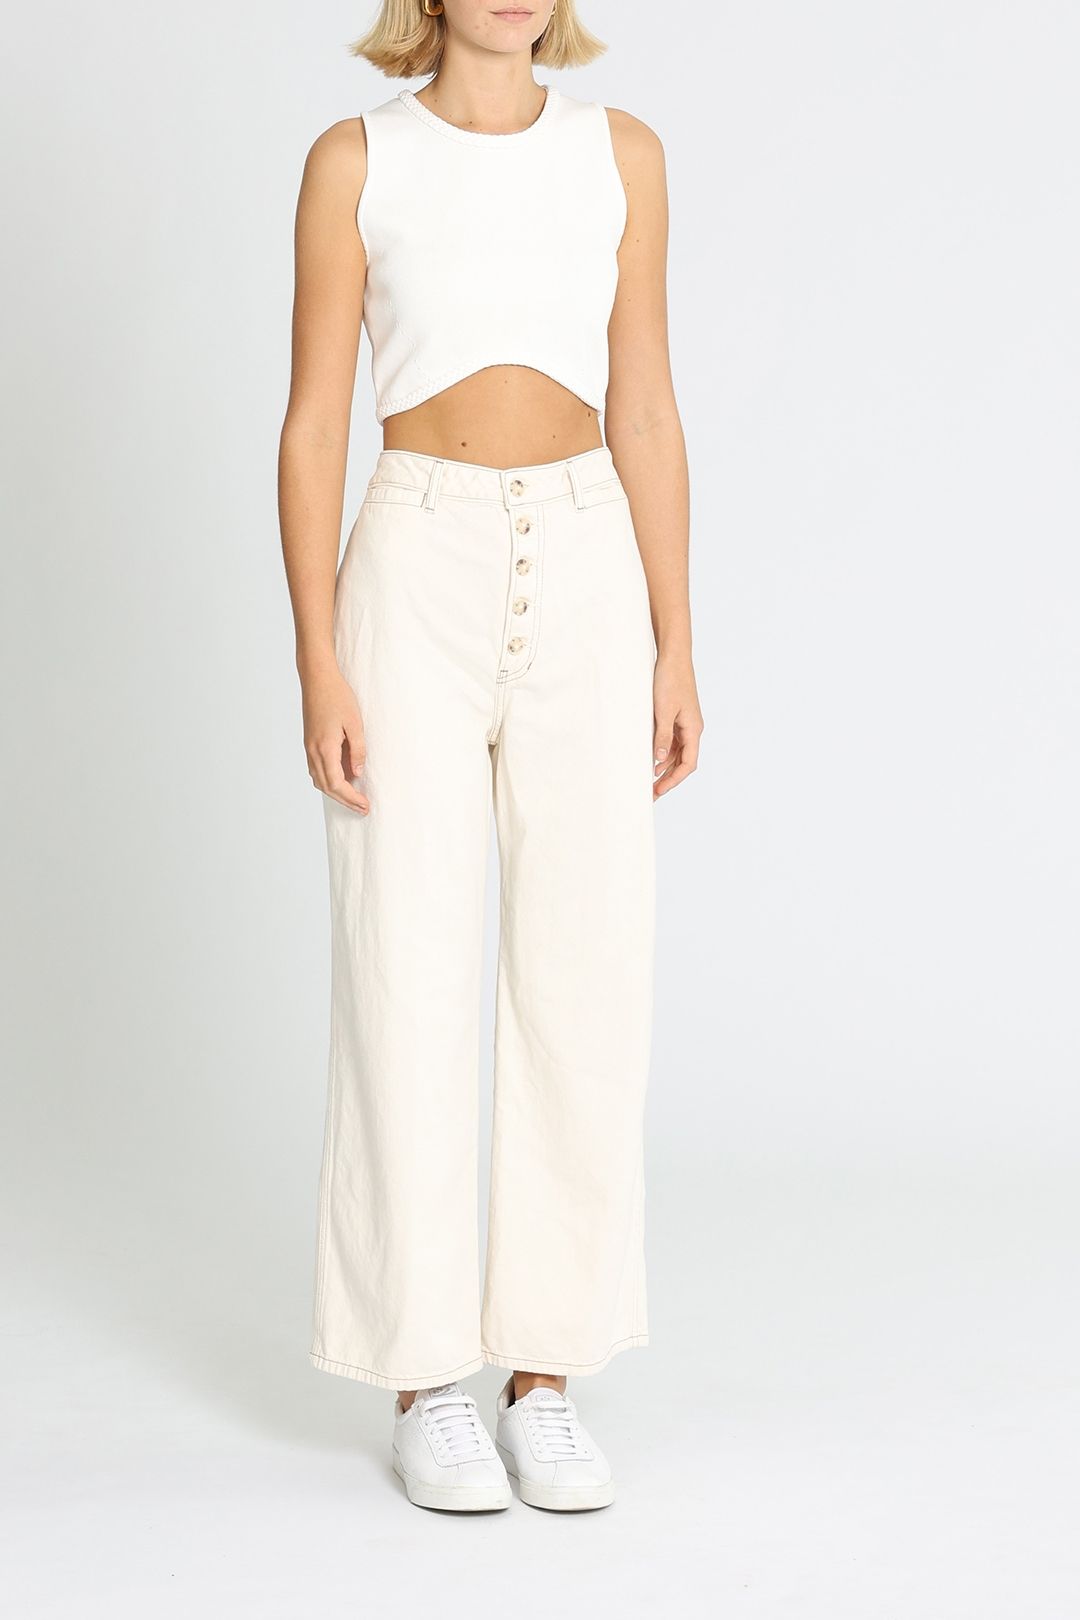 Reformation White Jeans Pockets